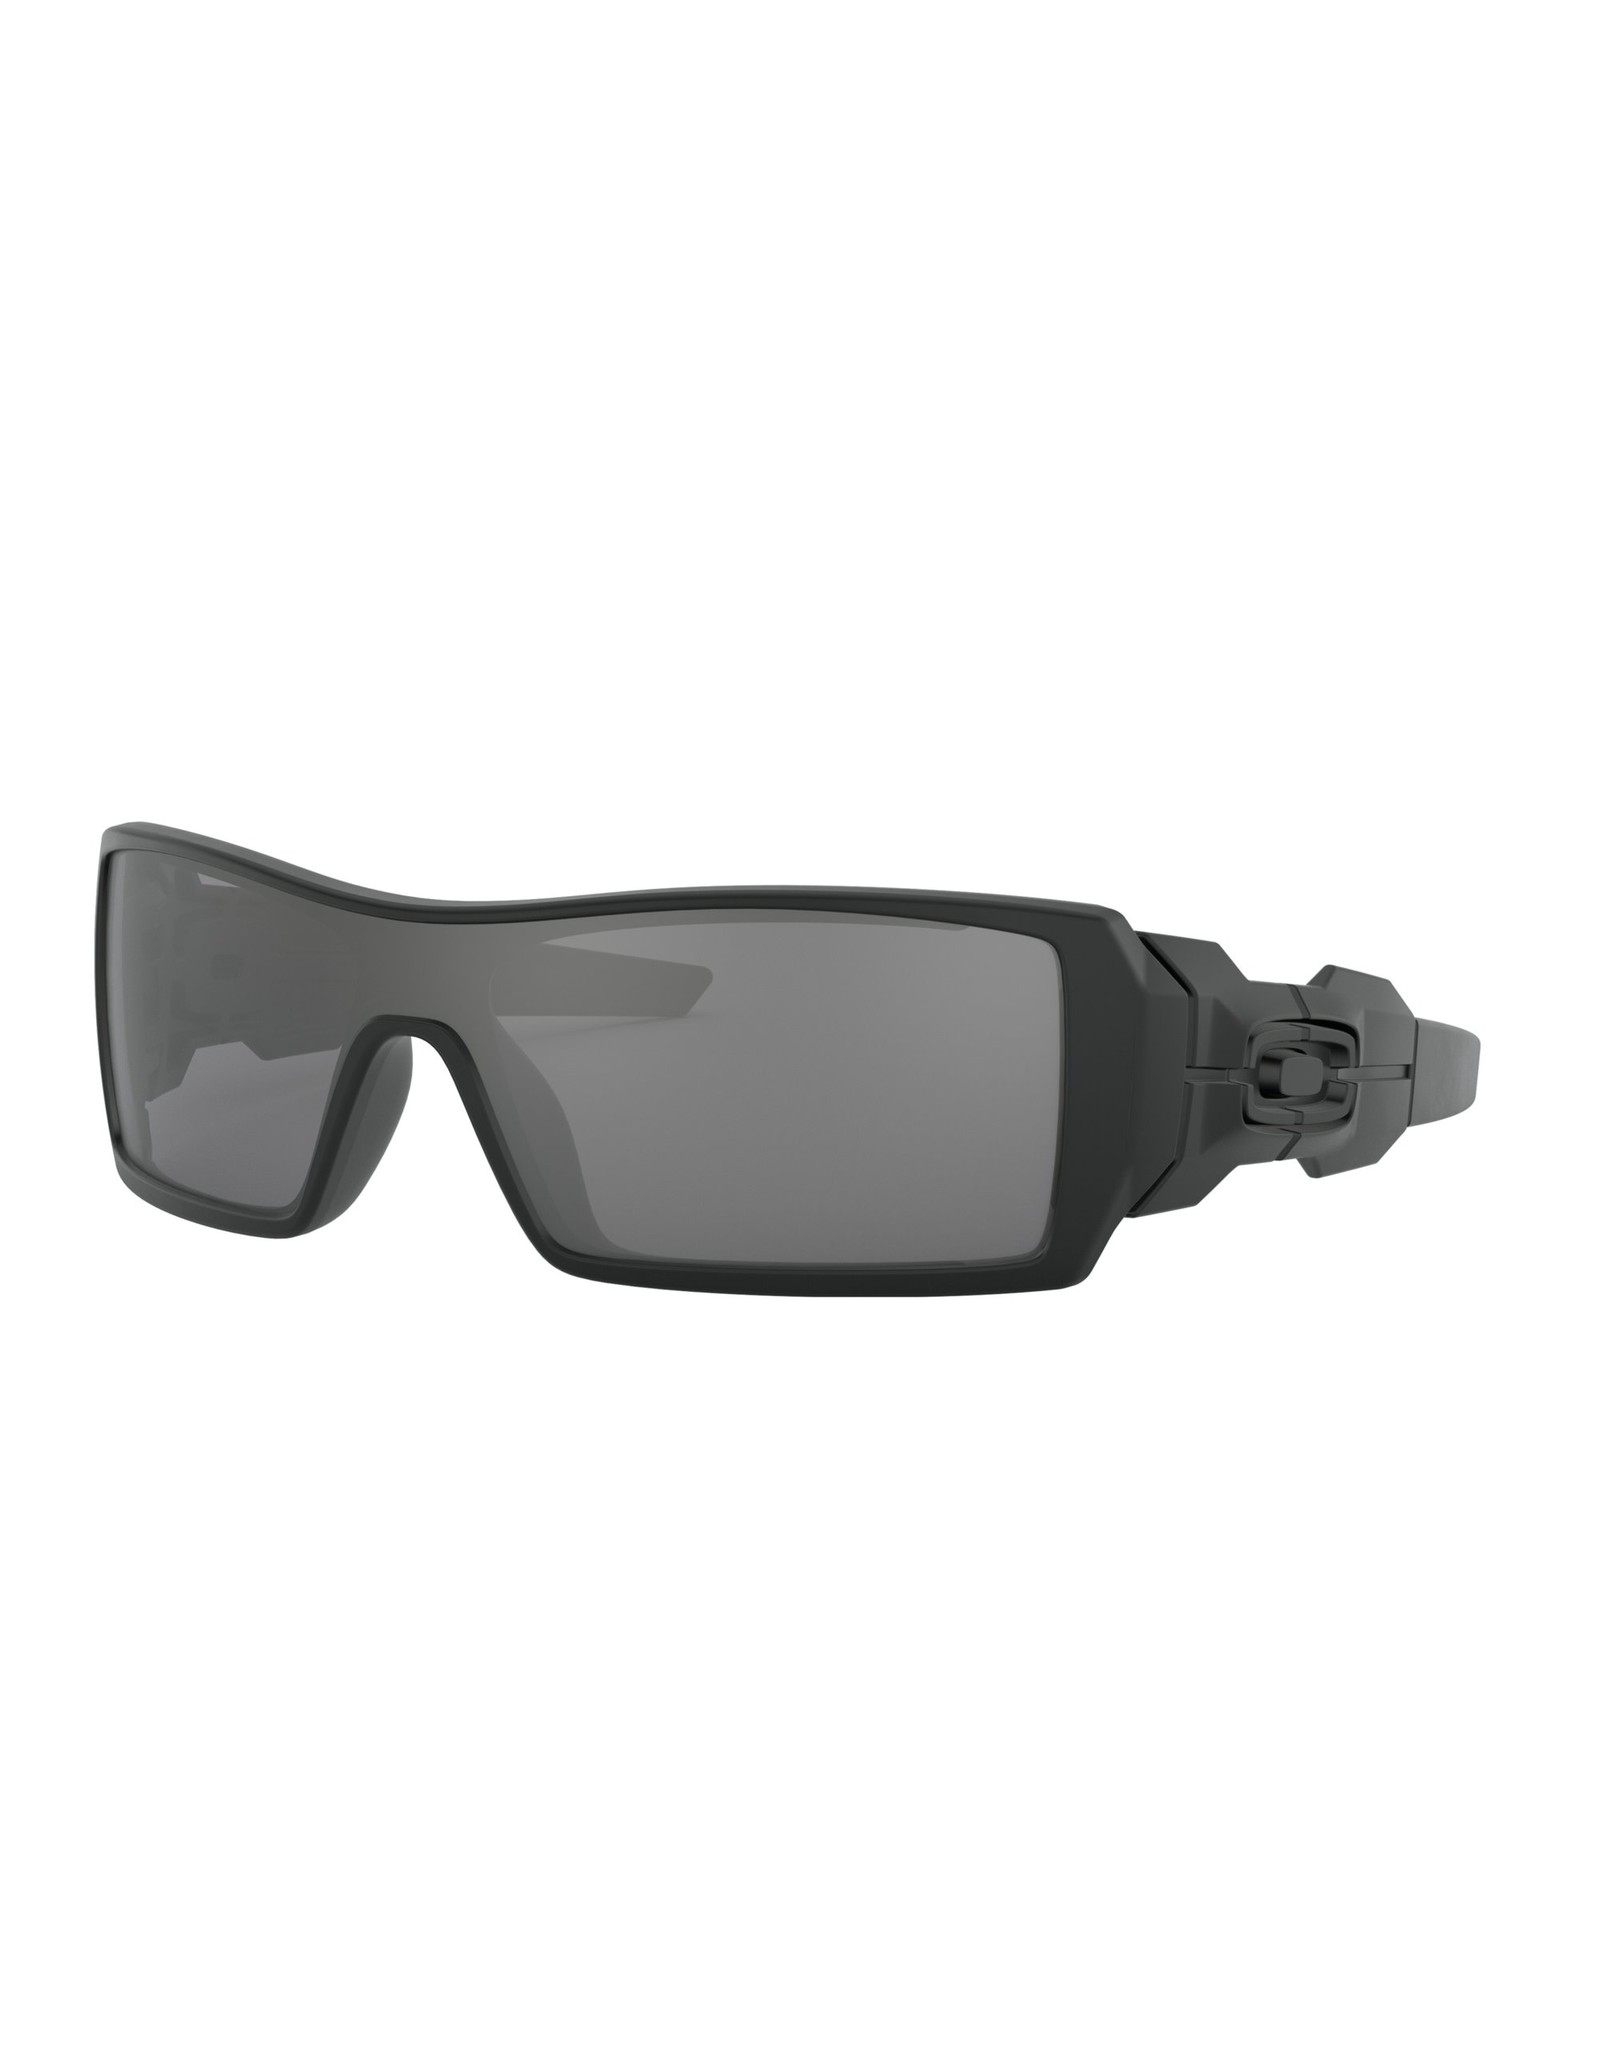 safety rated oakleys